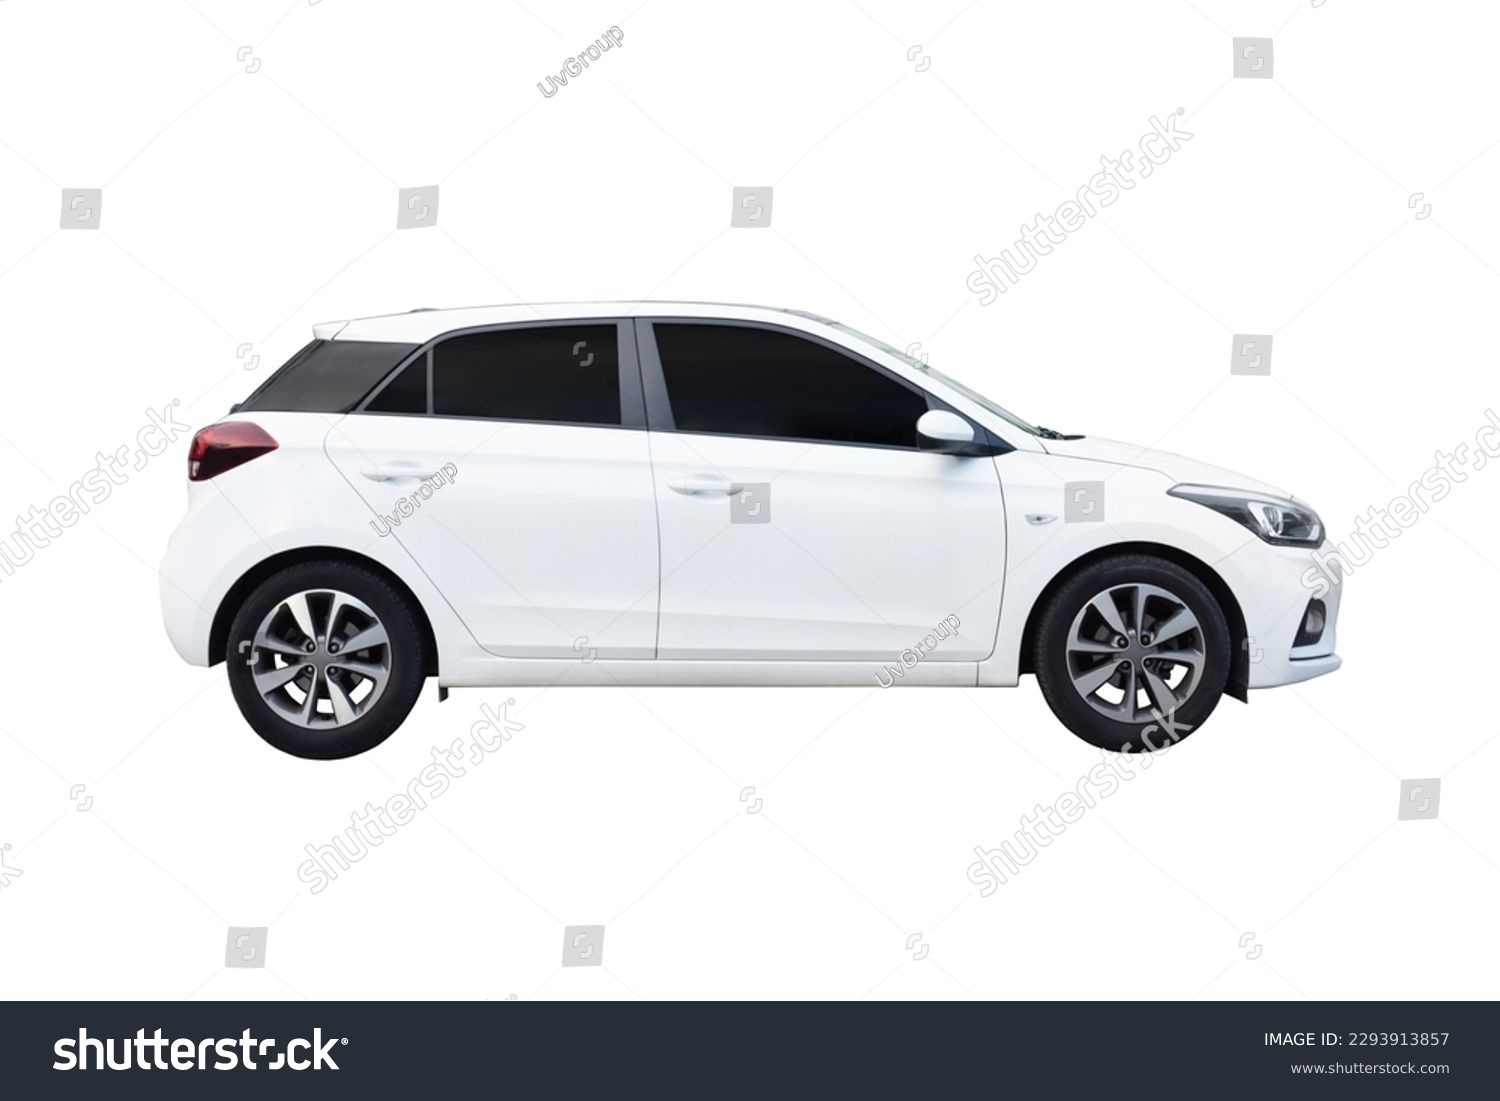 Passenger car isolated on a white background, with clipping path. Full Depth of field. Focus stacking, side view. #2293913857